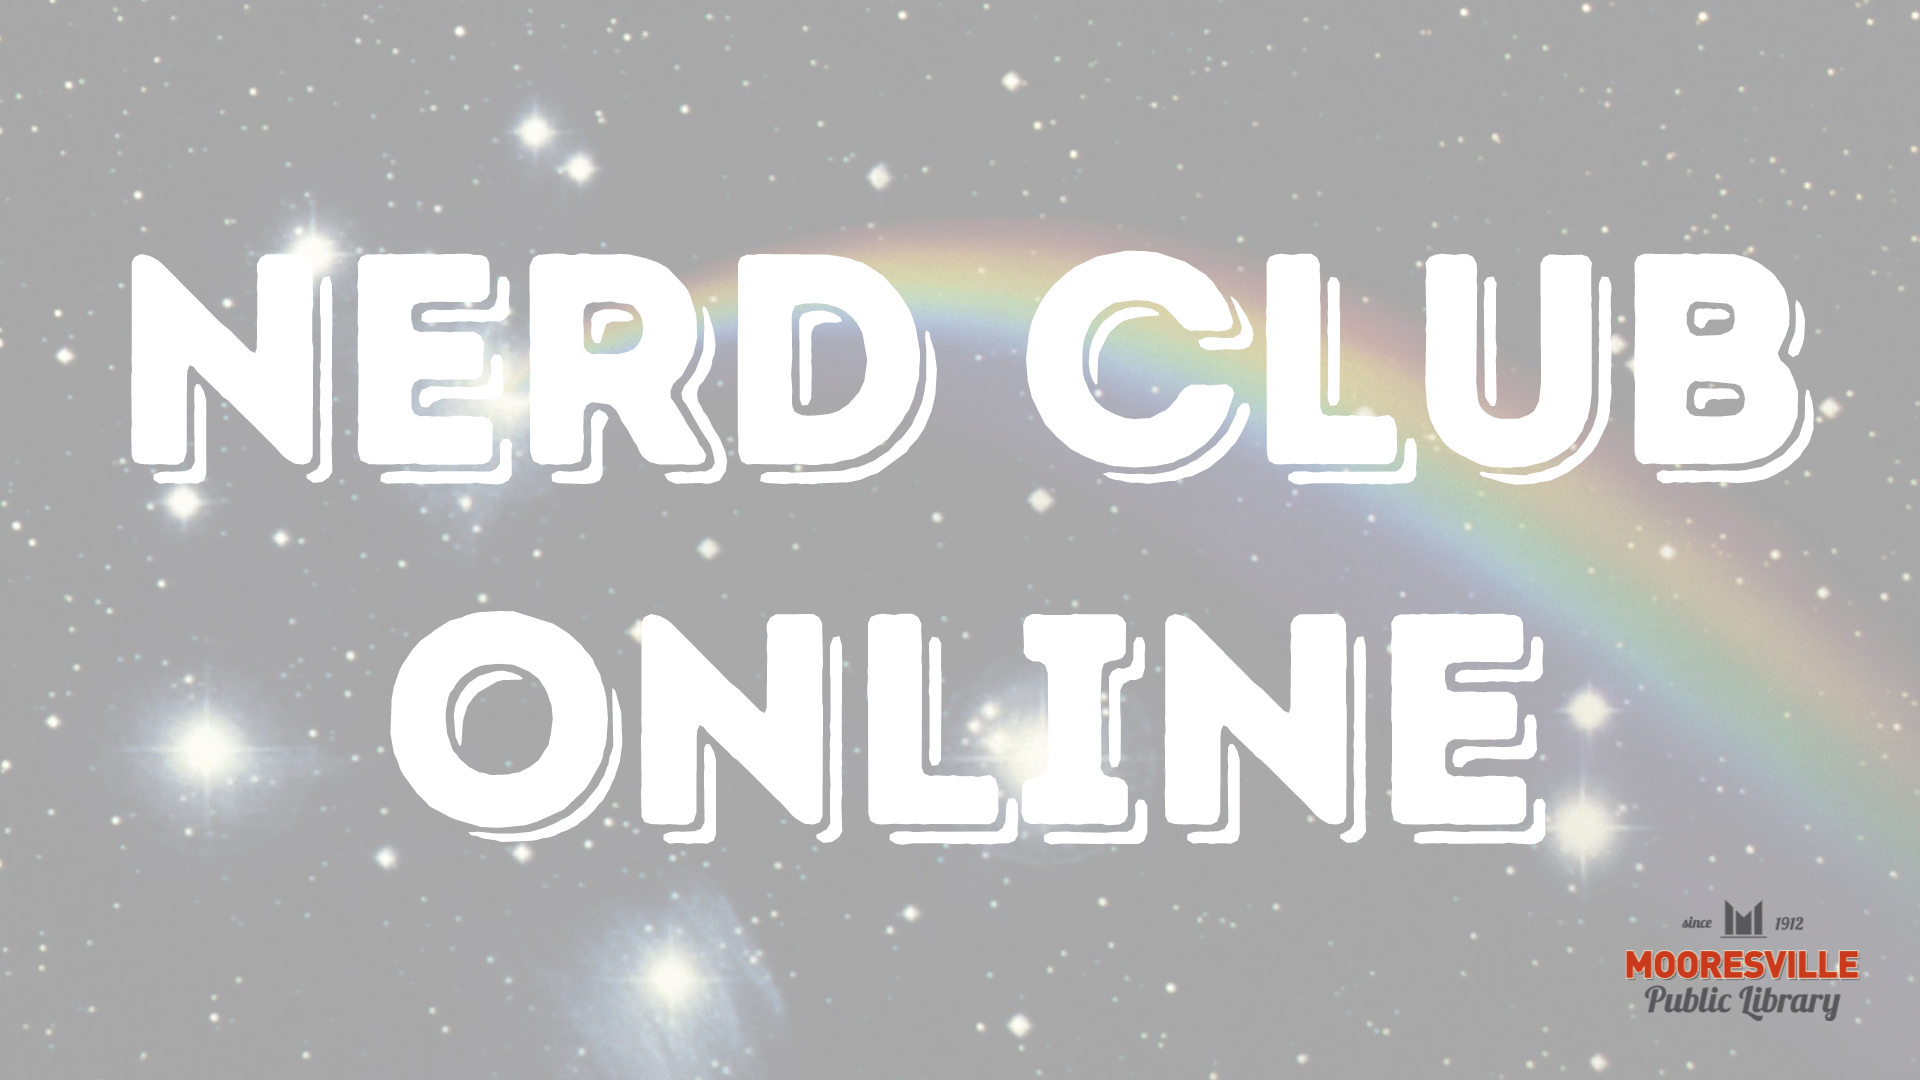 Galaxy background with rainbow prism. Text reads Nerd Club Online. Mooresville Public Library logo